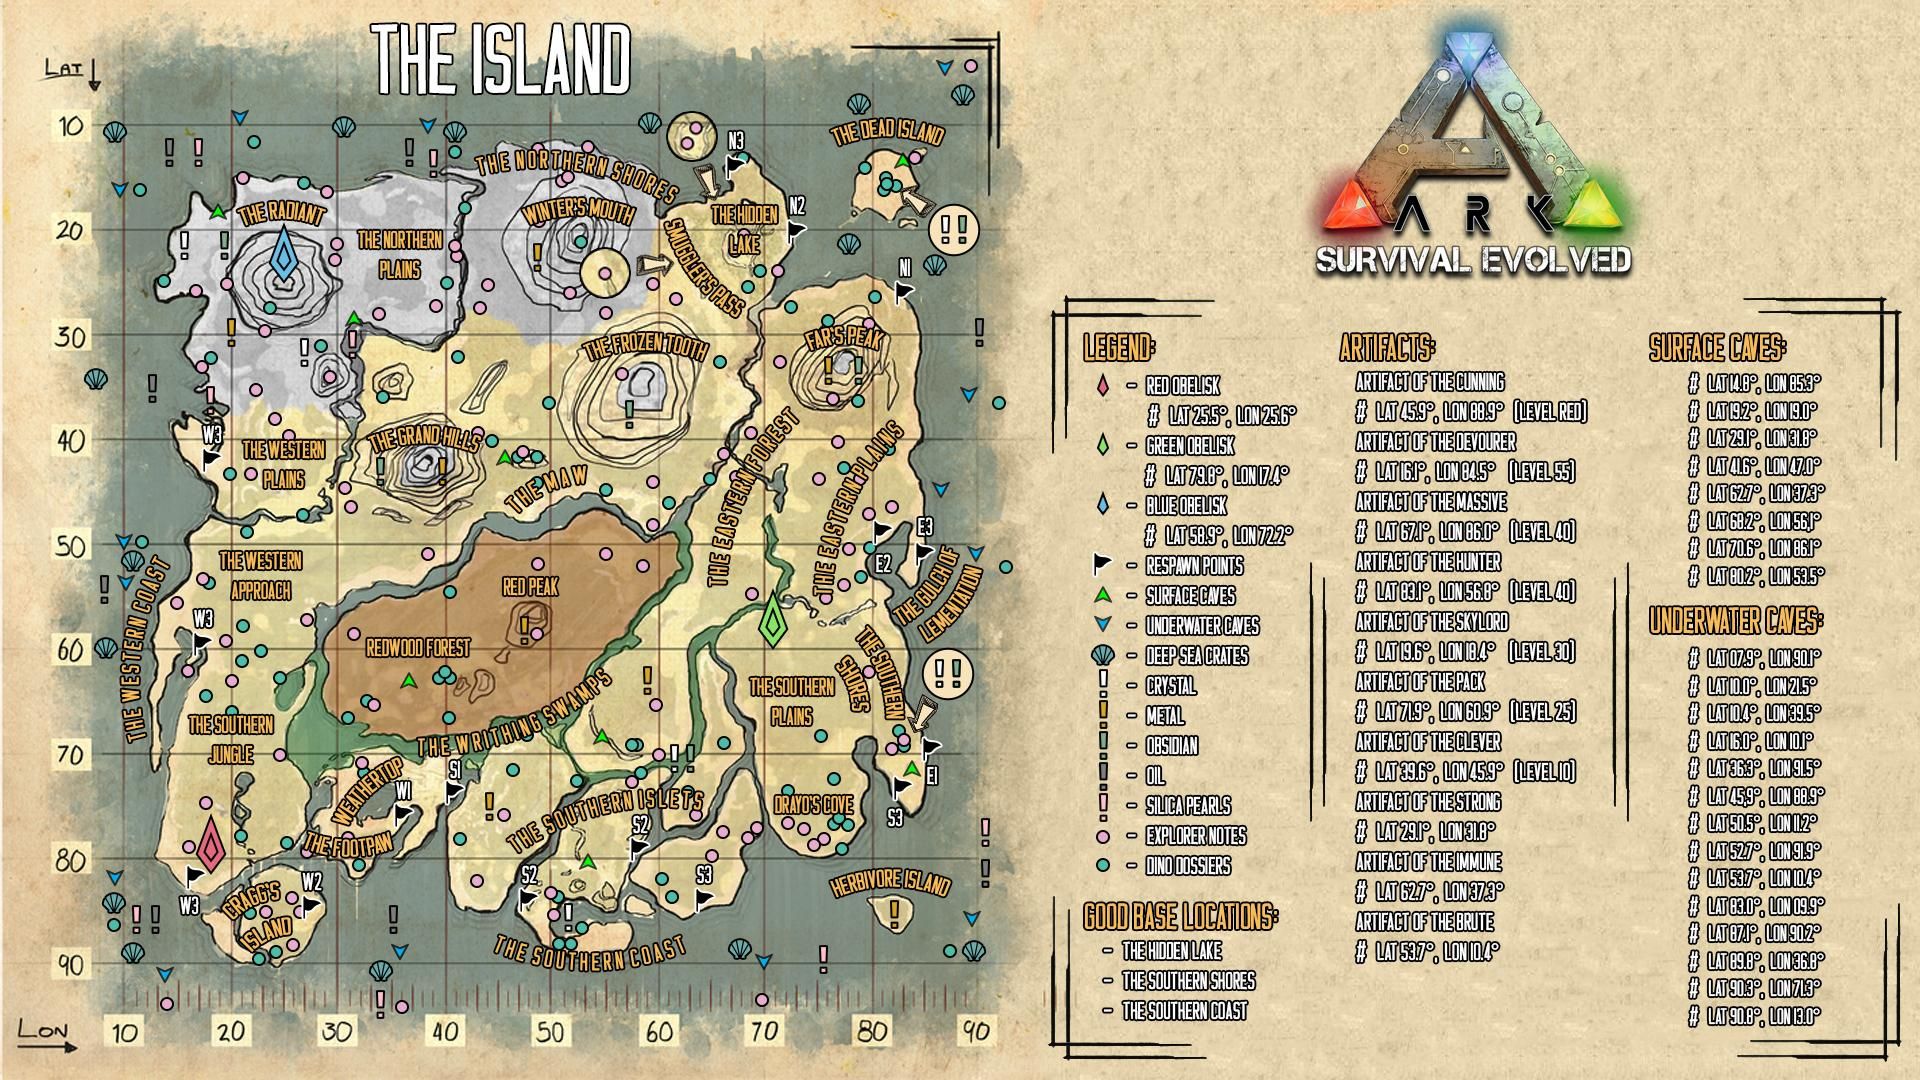 The Island is a go-to and friendly map